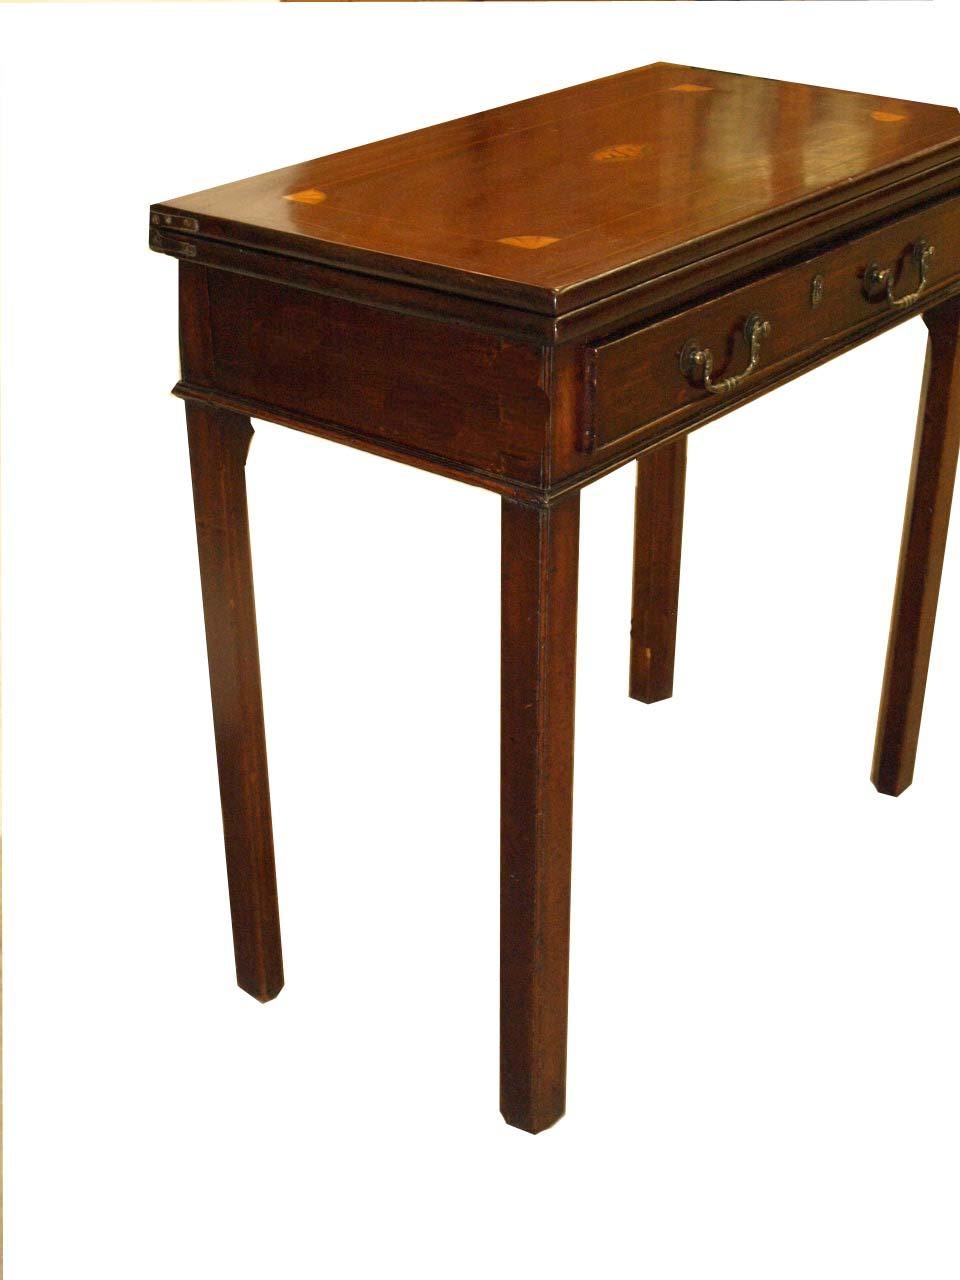 English Inlaid George III game table, the top with beautiful patina has a central conch shell inlaid medallion surrounded by convex corner fans connected with boxwood inlay. The hinged flip top is supported by one back swing leg; single drawer with